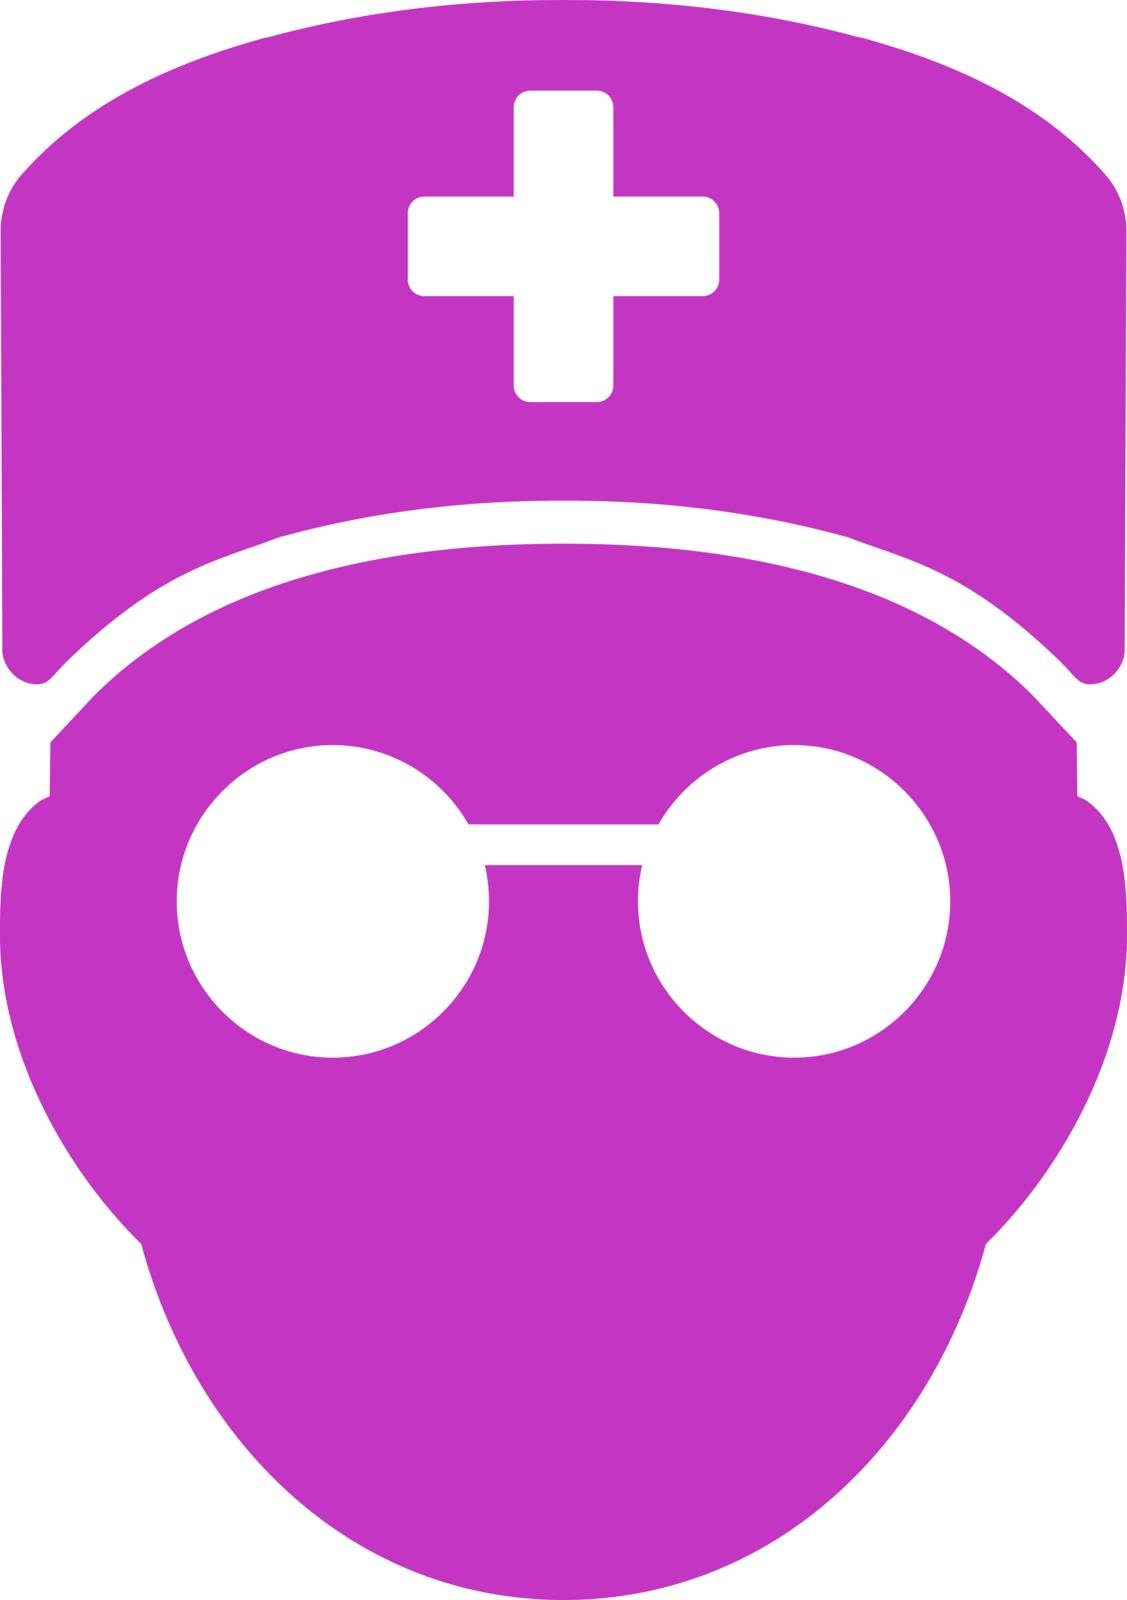 Medic Head vector icon. Style is flat symbol, violet color, rounded angles, white background.